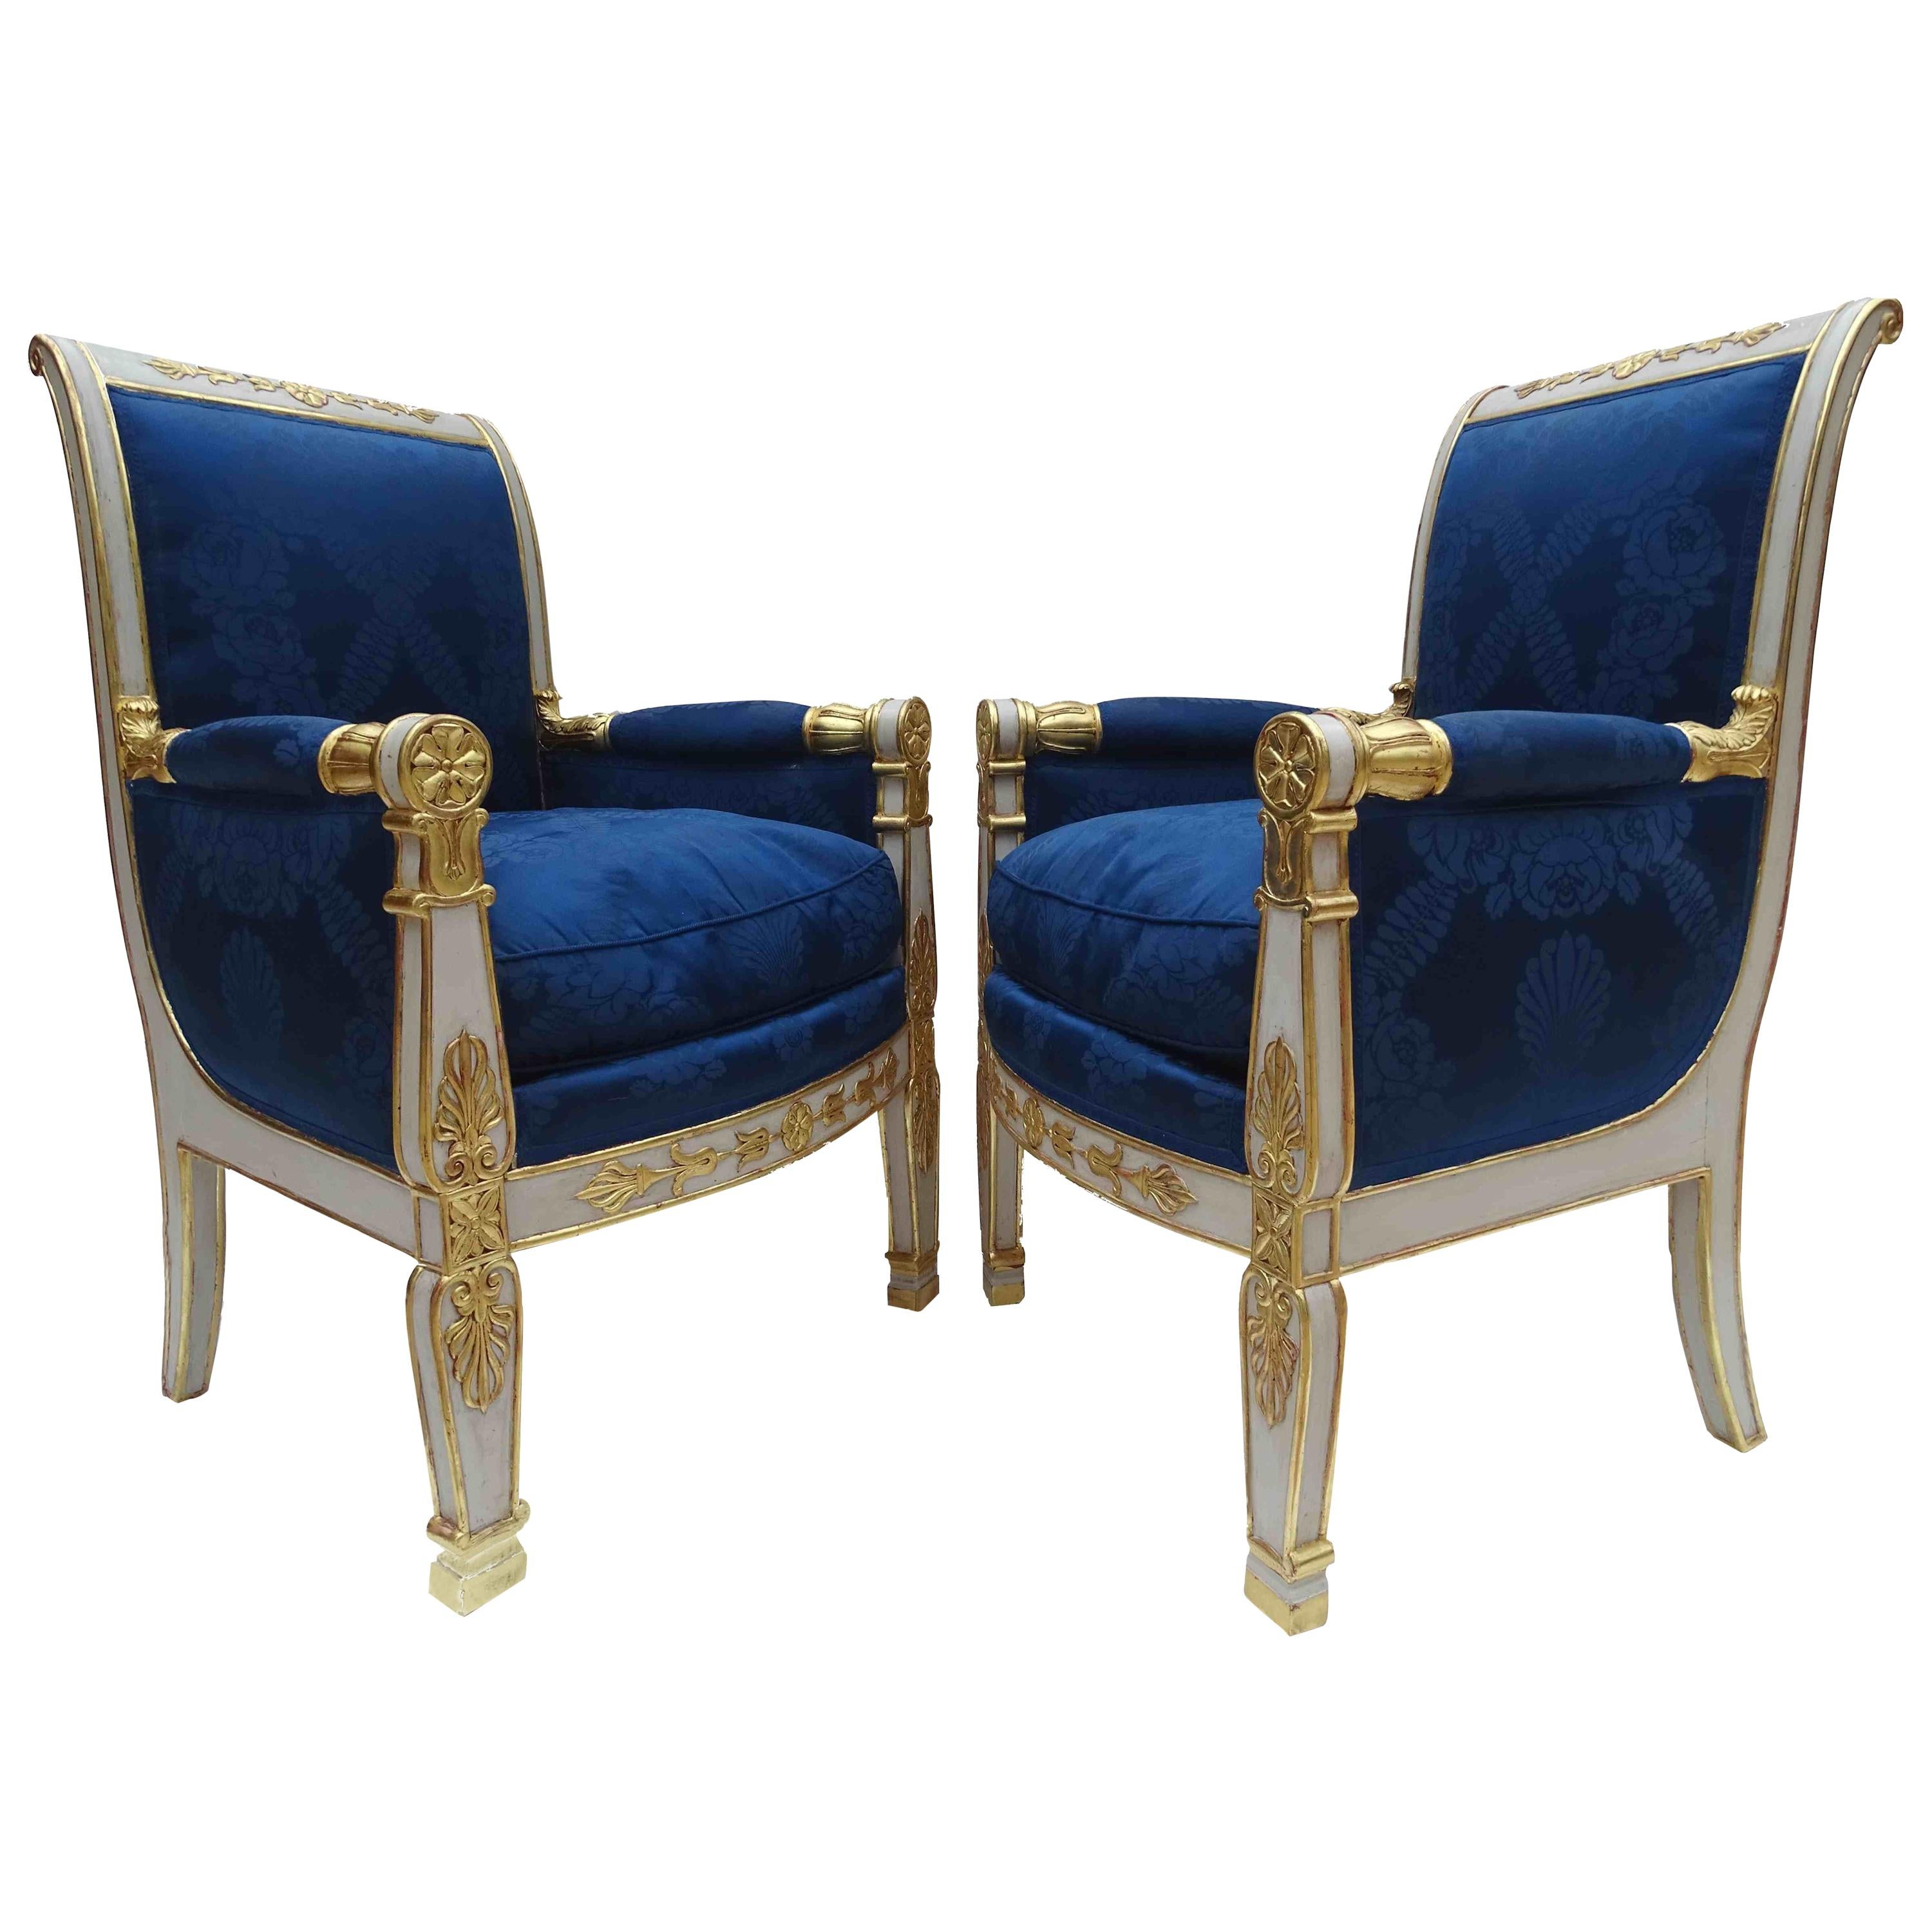 Gorgeous Empire Pair of  Blue Bergeres Armchairs by Jeanselme, France circa 1825